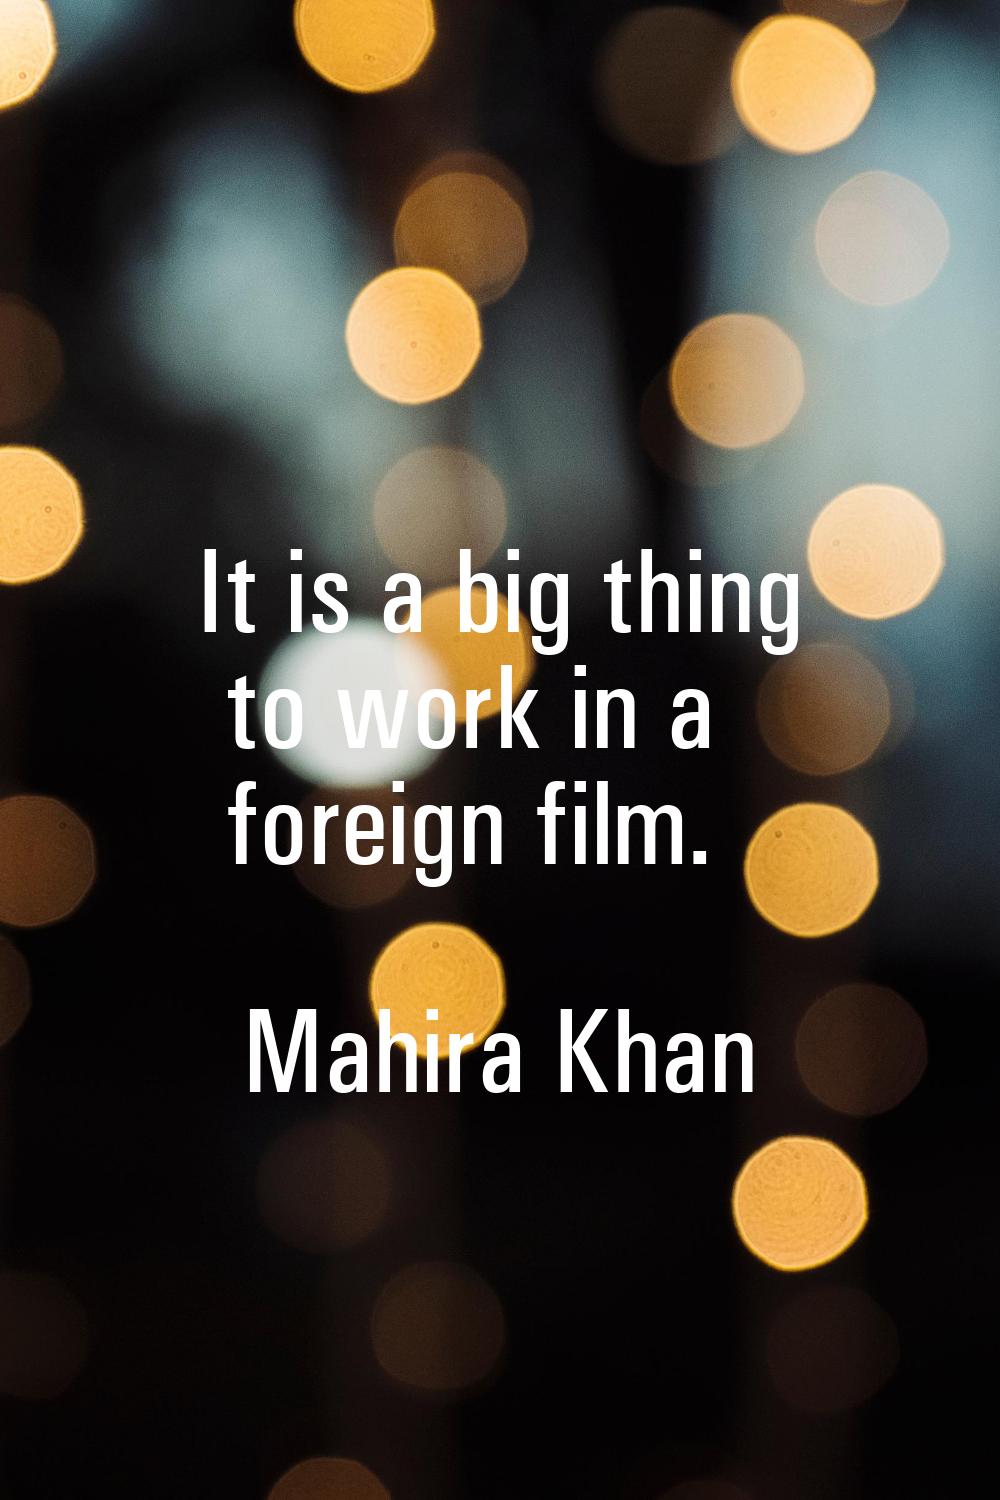 It is a big thing to work in a foreign film.